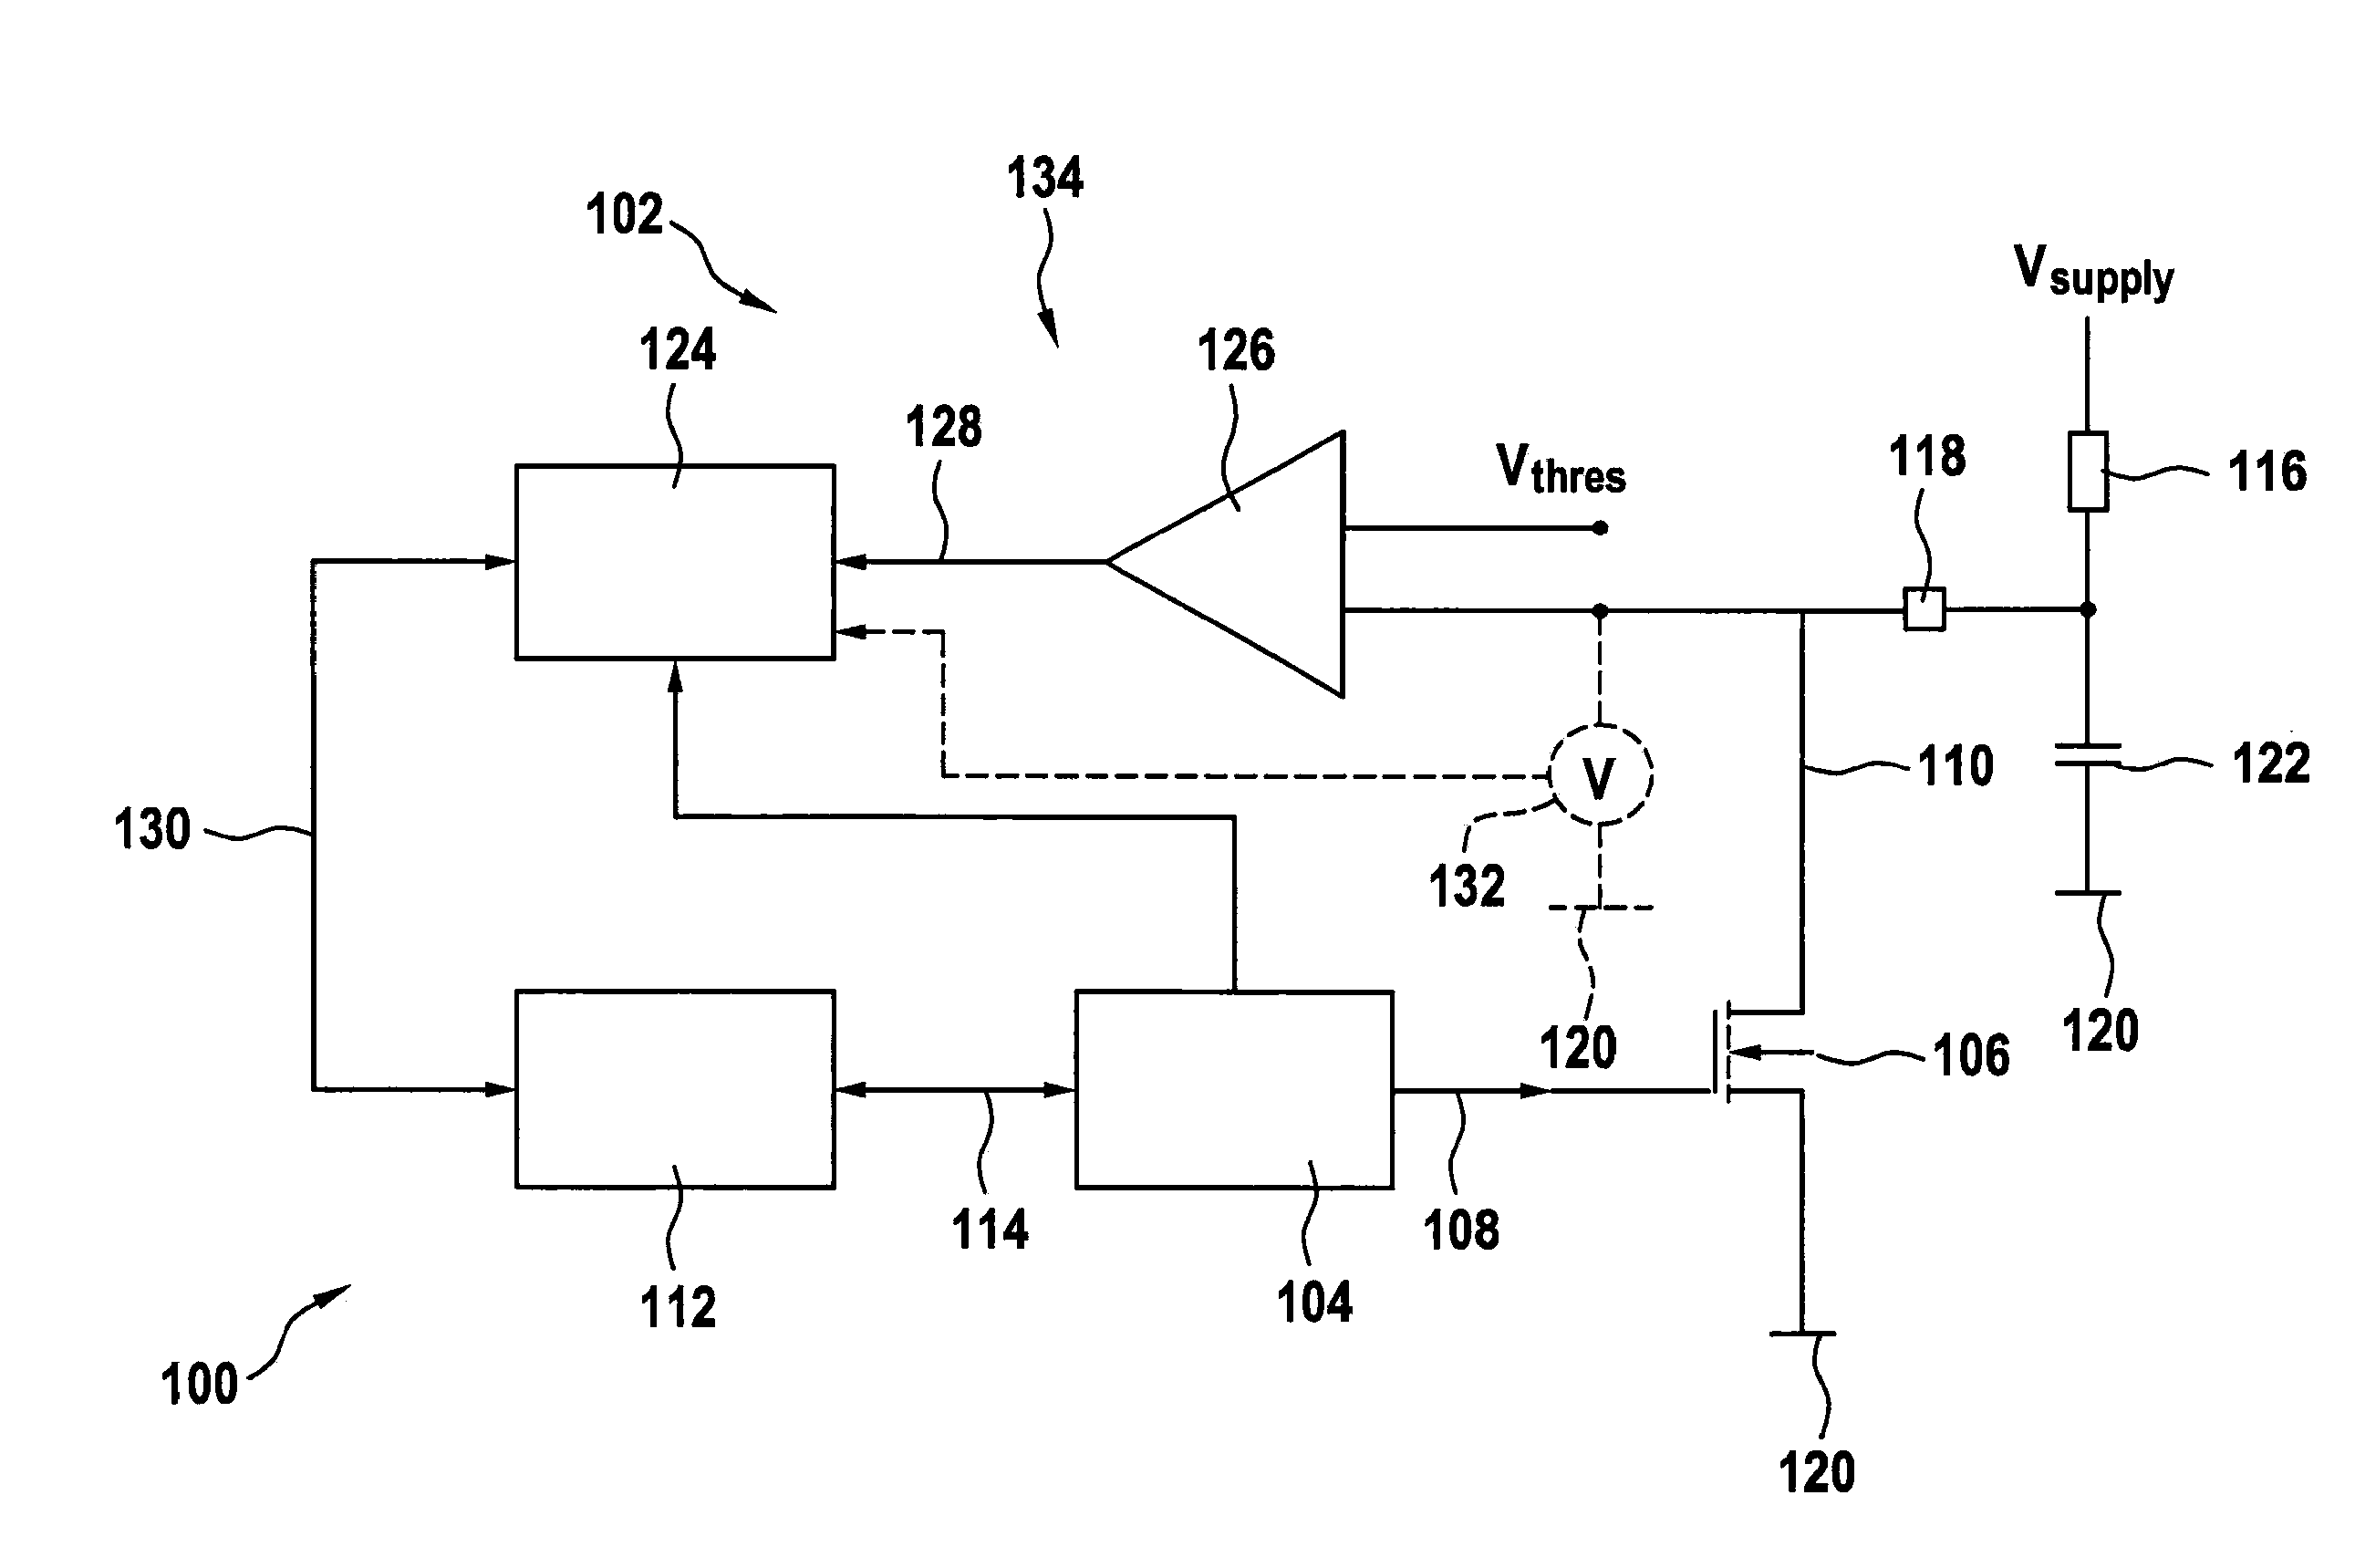 Method and device for recognizing a short circuit in a pwn driver circuit